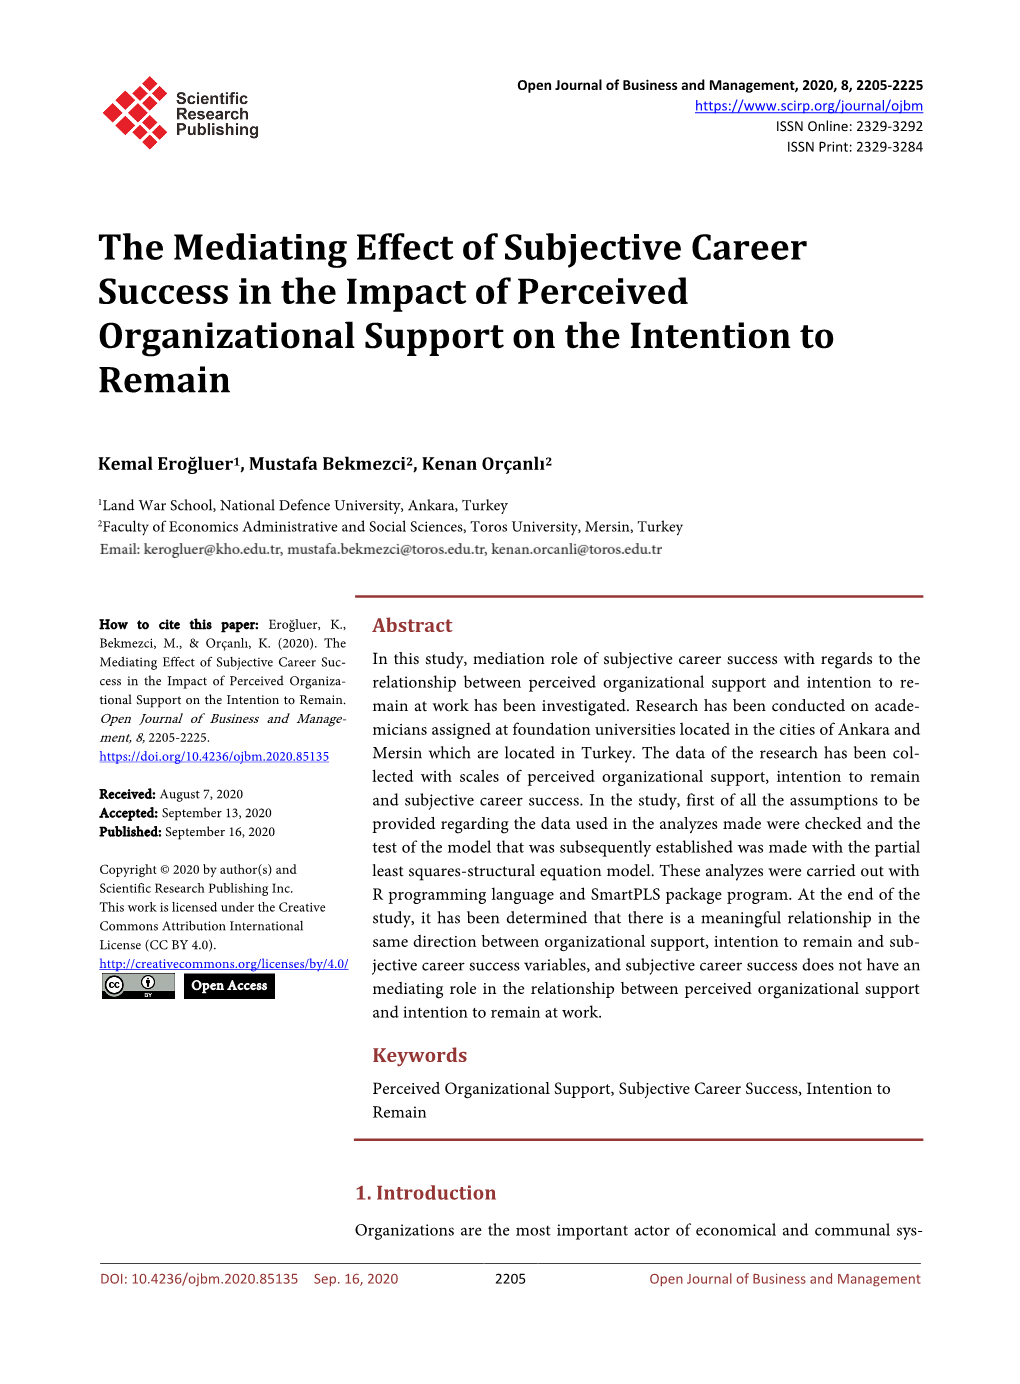 The Mediating Effect of Subjective Career Success in the Impact of Perceived Organizational Support on the Intention to Remain